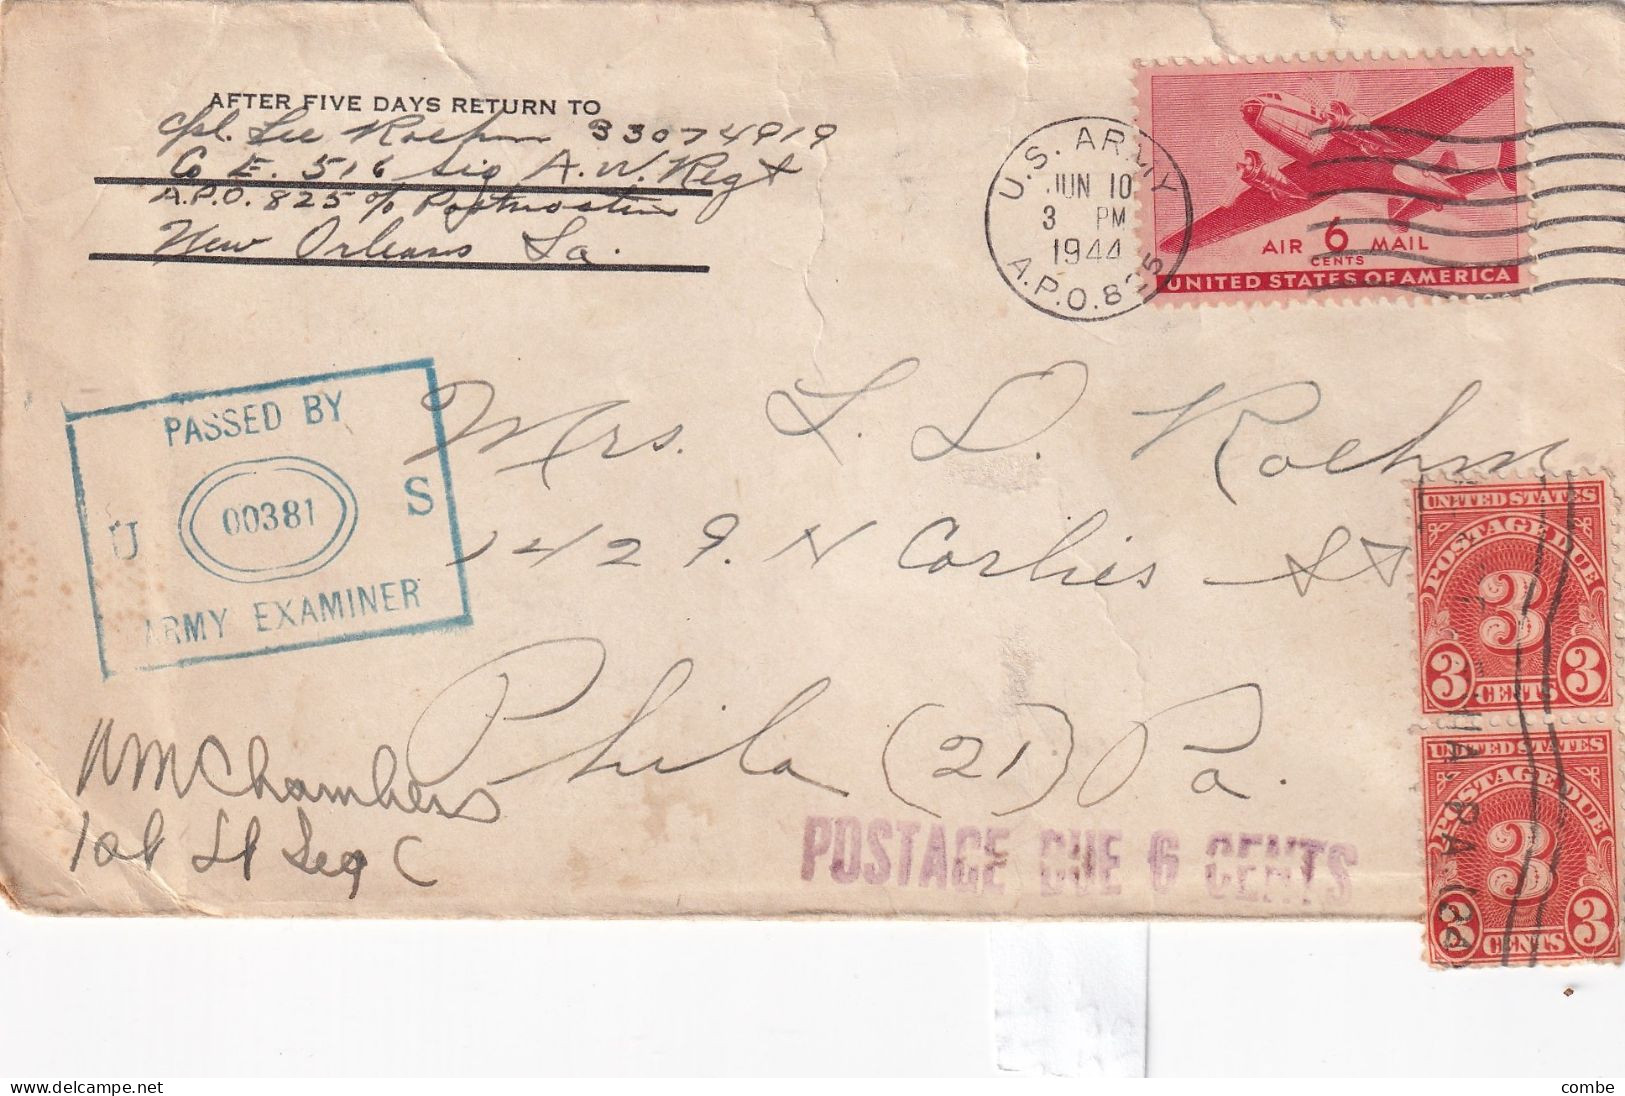 COVER US. 3 JUN 1944. APO 825. ALBROOK FIELD. CANAL ZONE. TO PHILA. PASSED BY EXAMINER. POSTAGE DUE 6 CENTS - Storia Postale